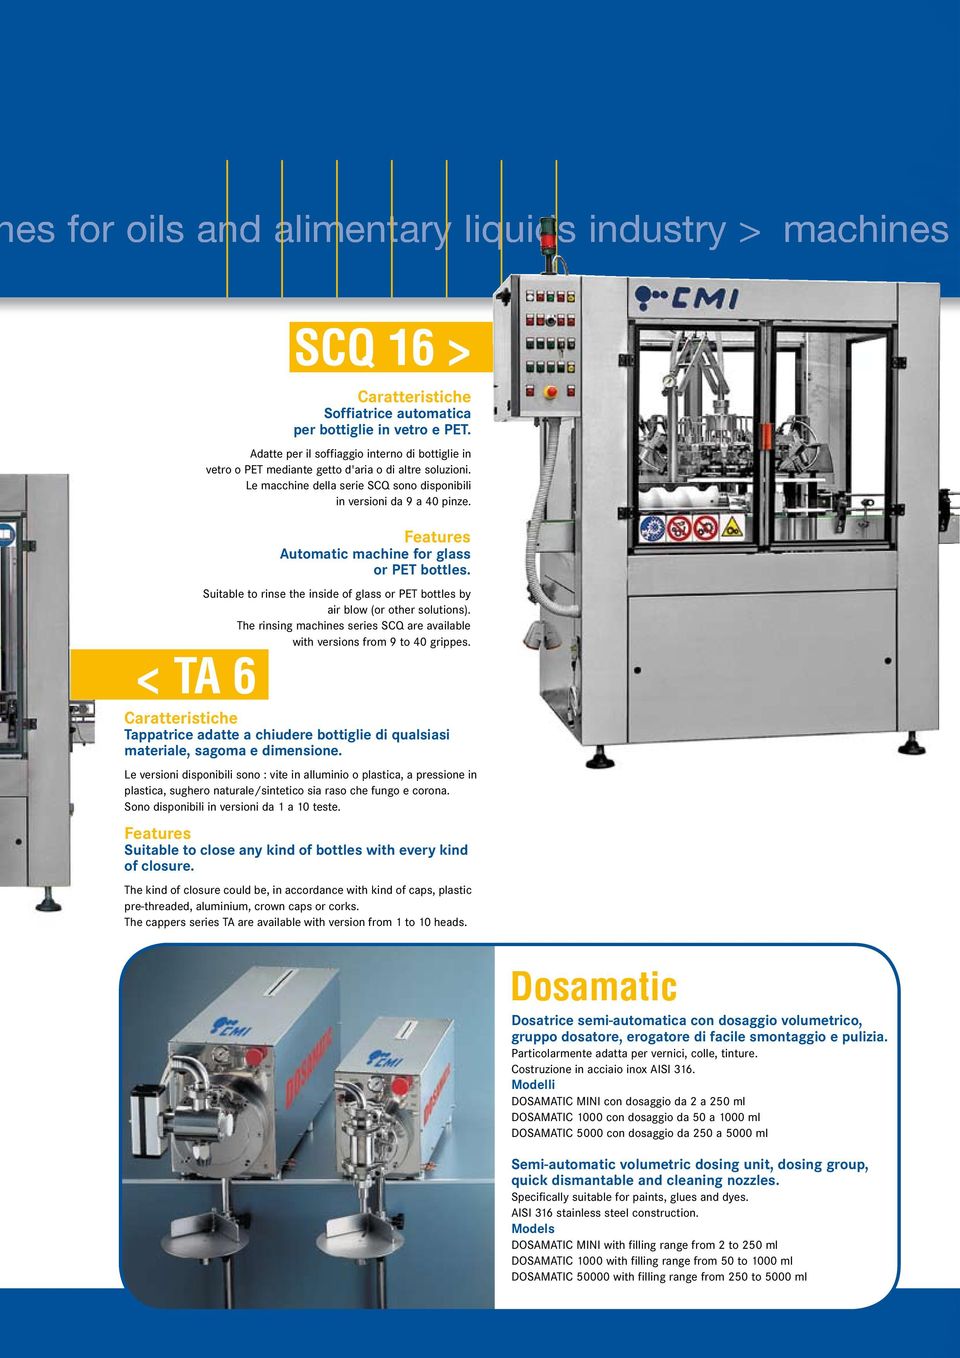 Automatic machine for glass or PET bottles. Suitable to rinse the inside of glass or PET bottles by air blow (or other solutions).